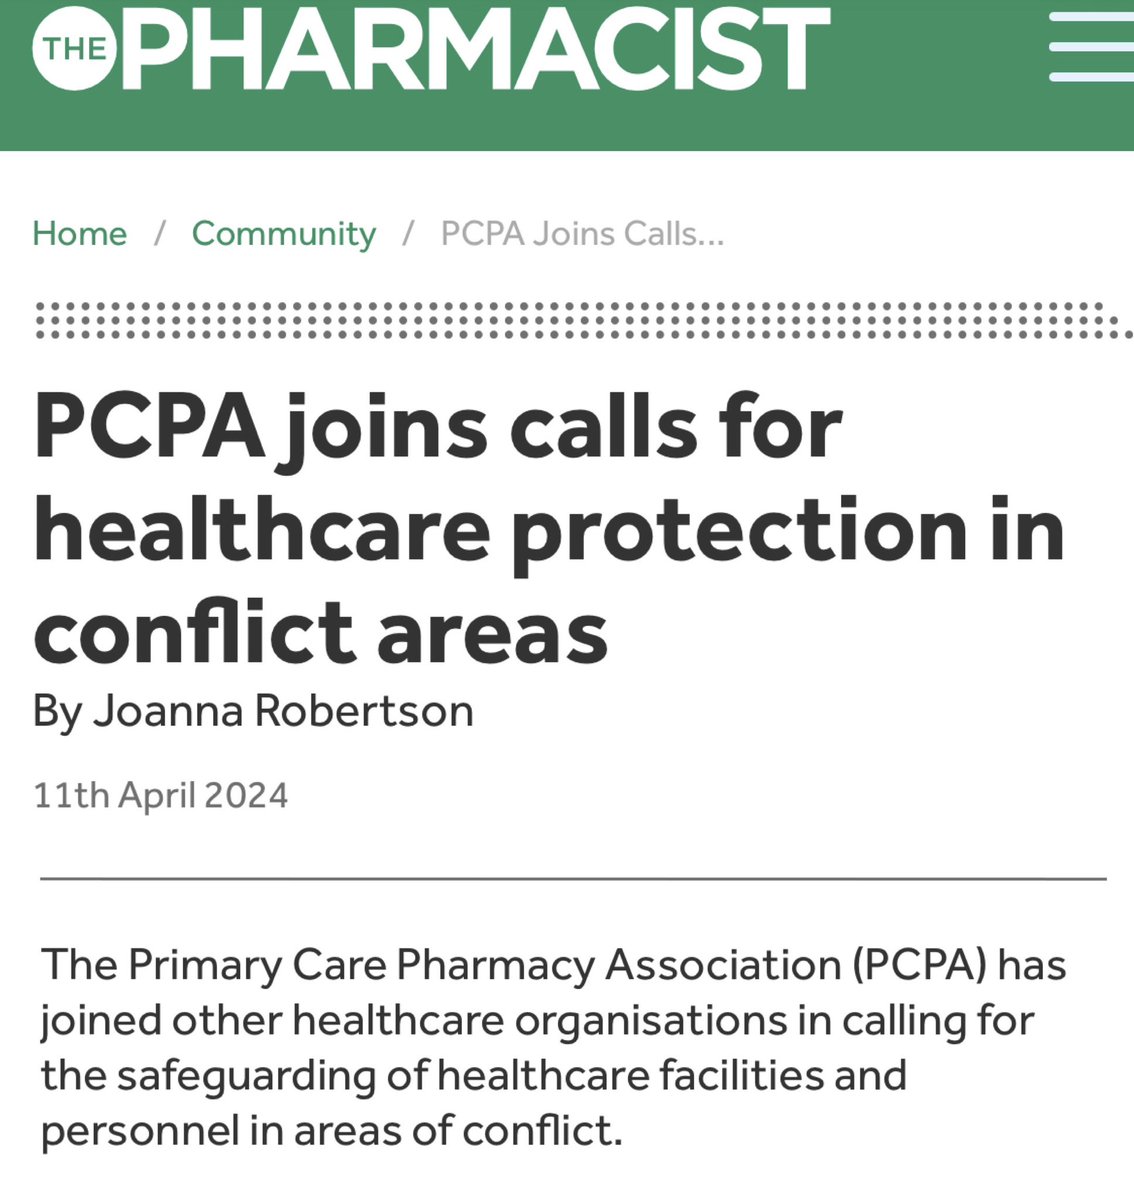 ‘We all feel powerless reading about abuses & contraventions of conventions & laws in conflict zones, it is important professionals selflessly providing frontline healthcare know colleagues support & advocate for them’ - @GrahamStretch thepharmacist.co.uk/in-practice/pc…